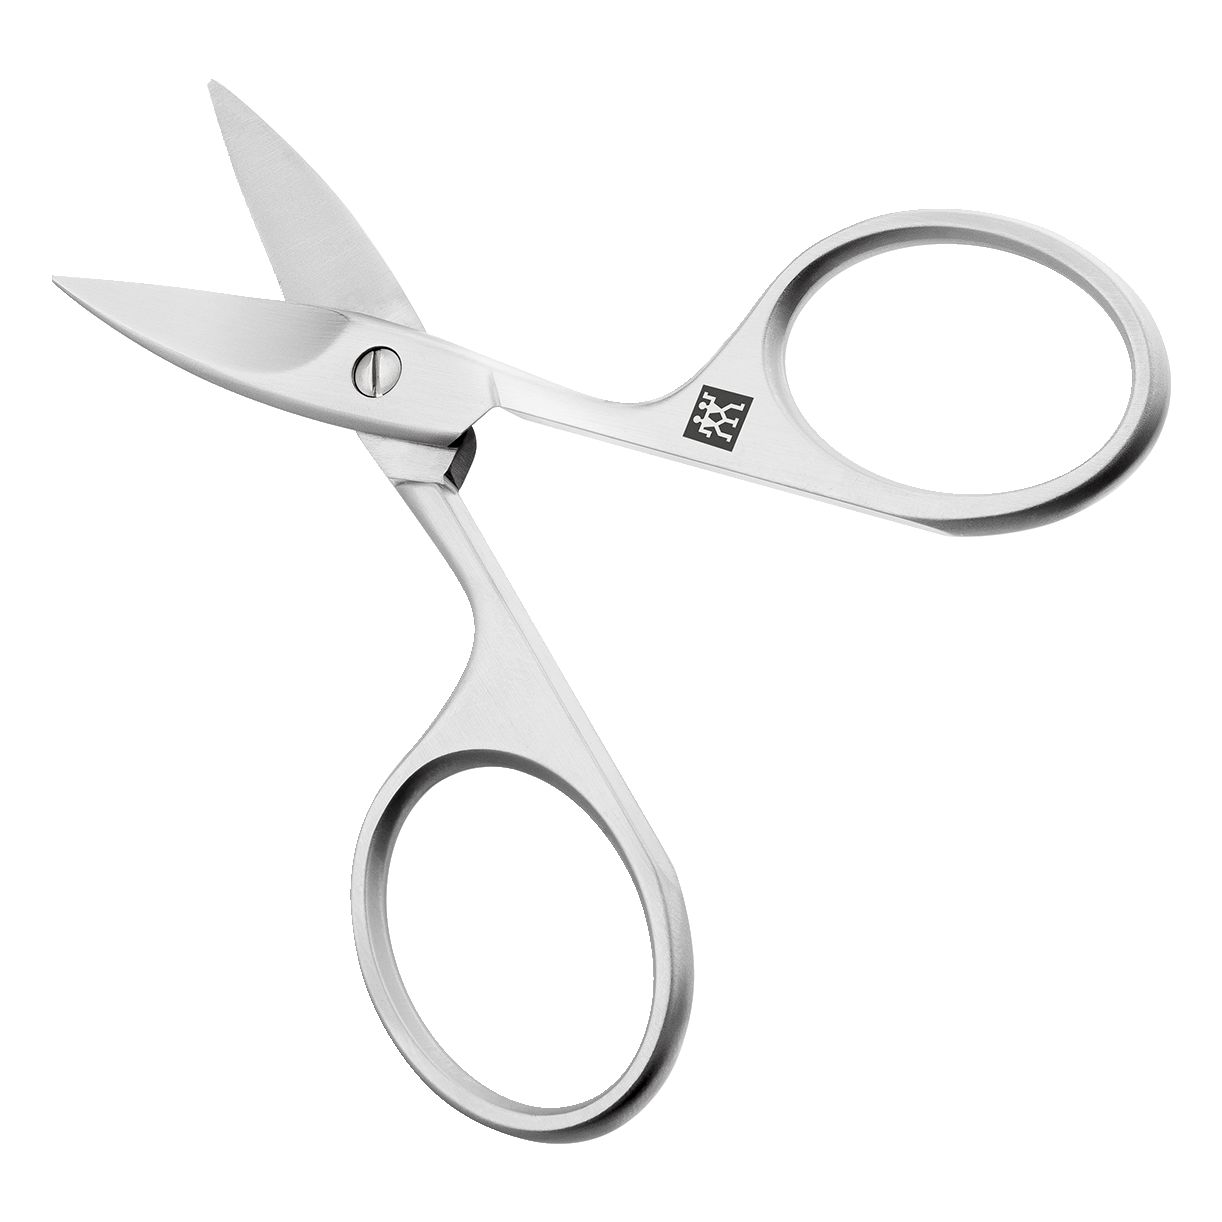 Zwilling J.A. Henckels TWIN L 6 Barber Scissors with Finger Rest -  KnifeCenter - 43653-161 - Discontinued